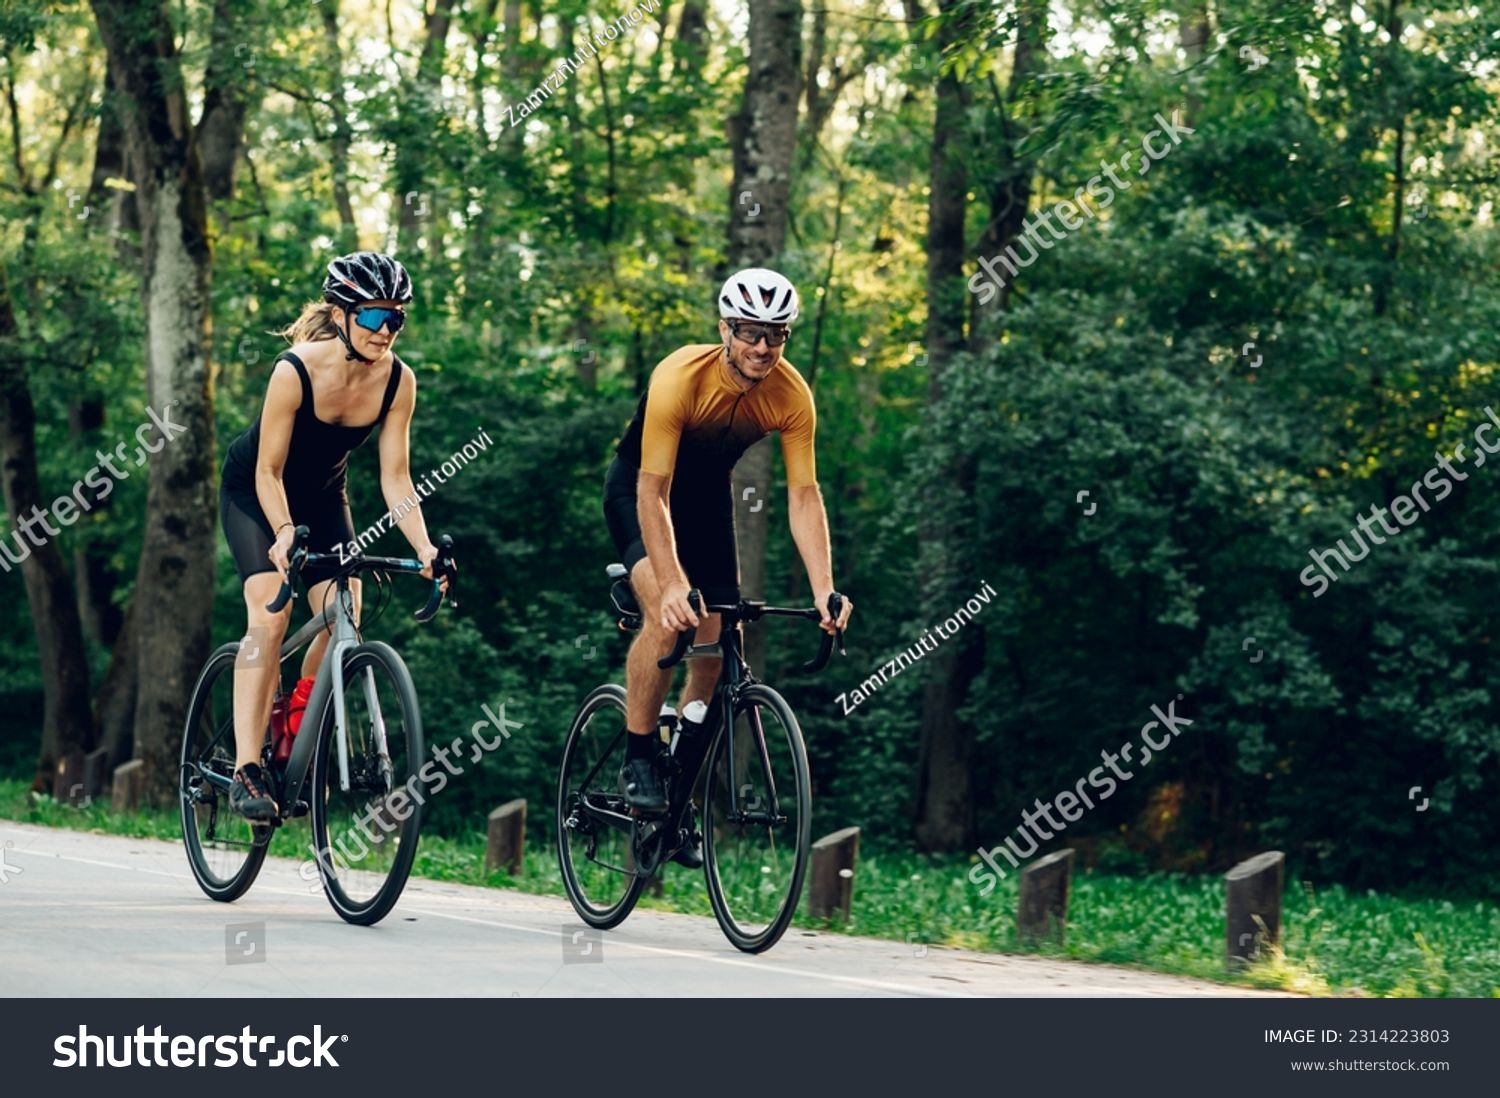 Smiling couple of athletes biking fast on paved road outside of the city. Countryside area, sunny day outdoors. Professional road bicycle racers in action. Concept of endurance and strength. #2314223803